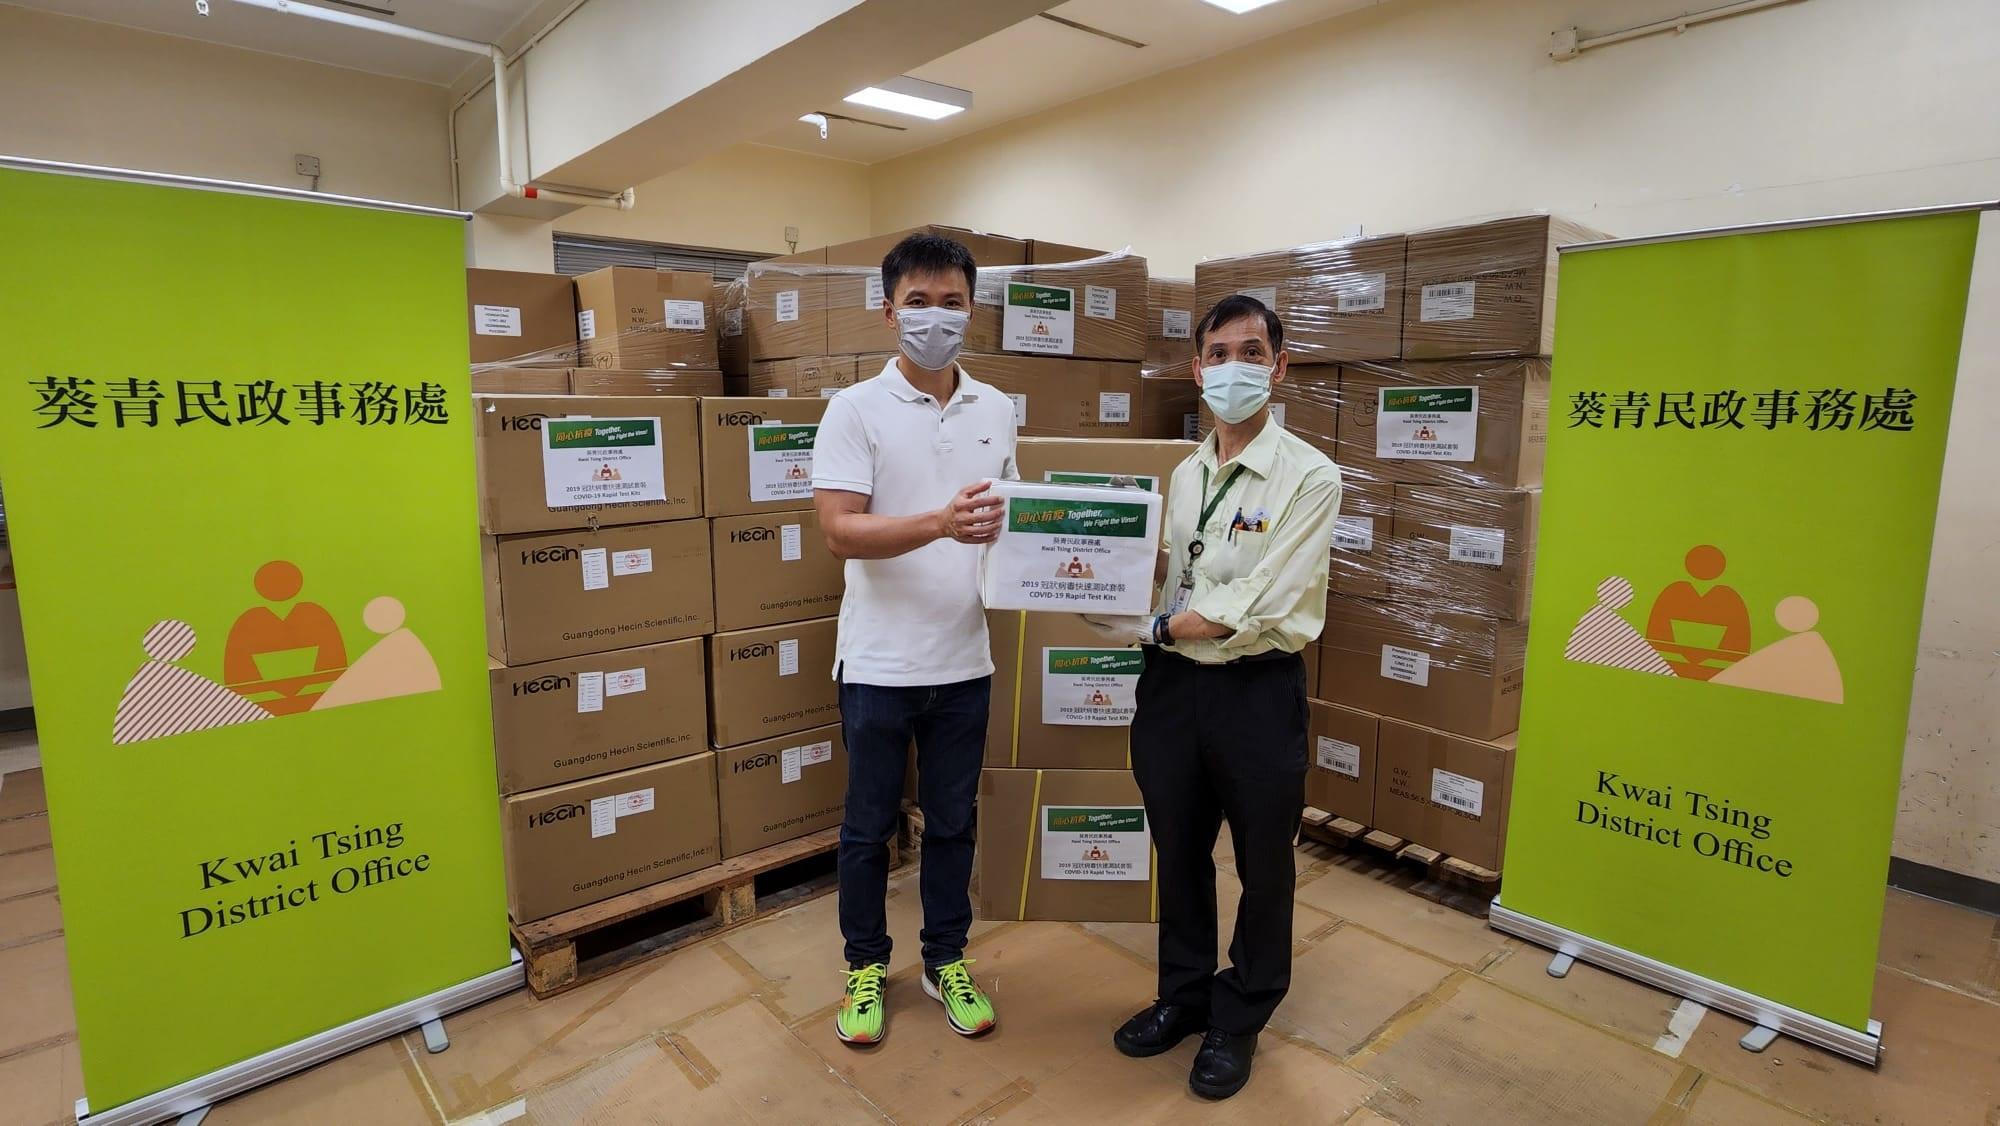 The Kwai Tsing District Office today (July 11) distributed rapid test kits to households, cleansing workers and property management staff living and working in Greenfield Garden for voluntary testing through the property management company.